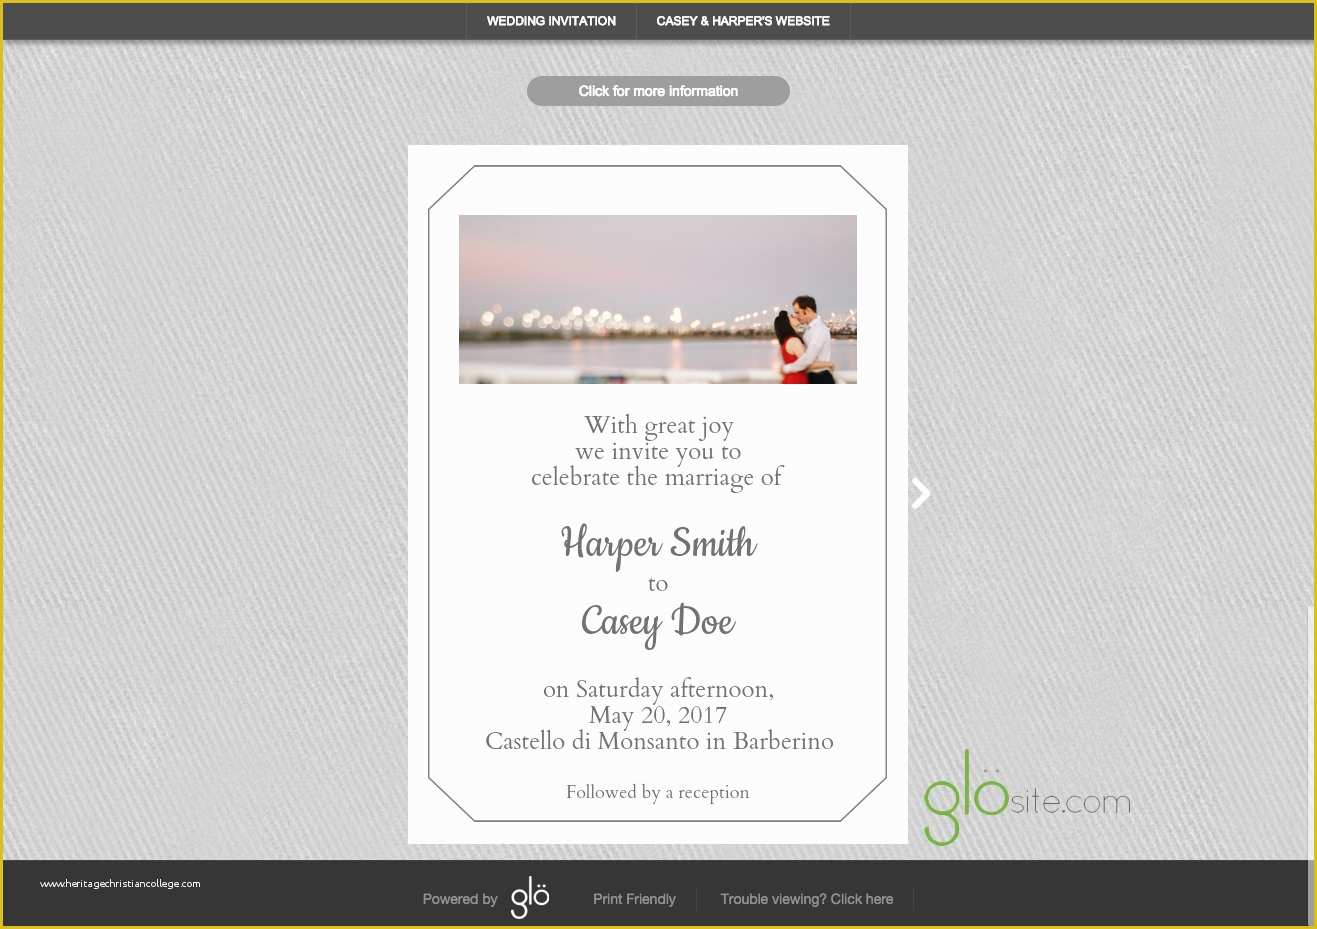 Free Email Wedding Invitation Templates Of New Email Wedding Invitations Design Template Features